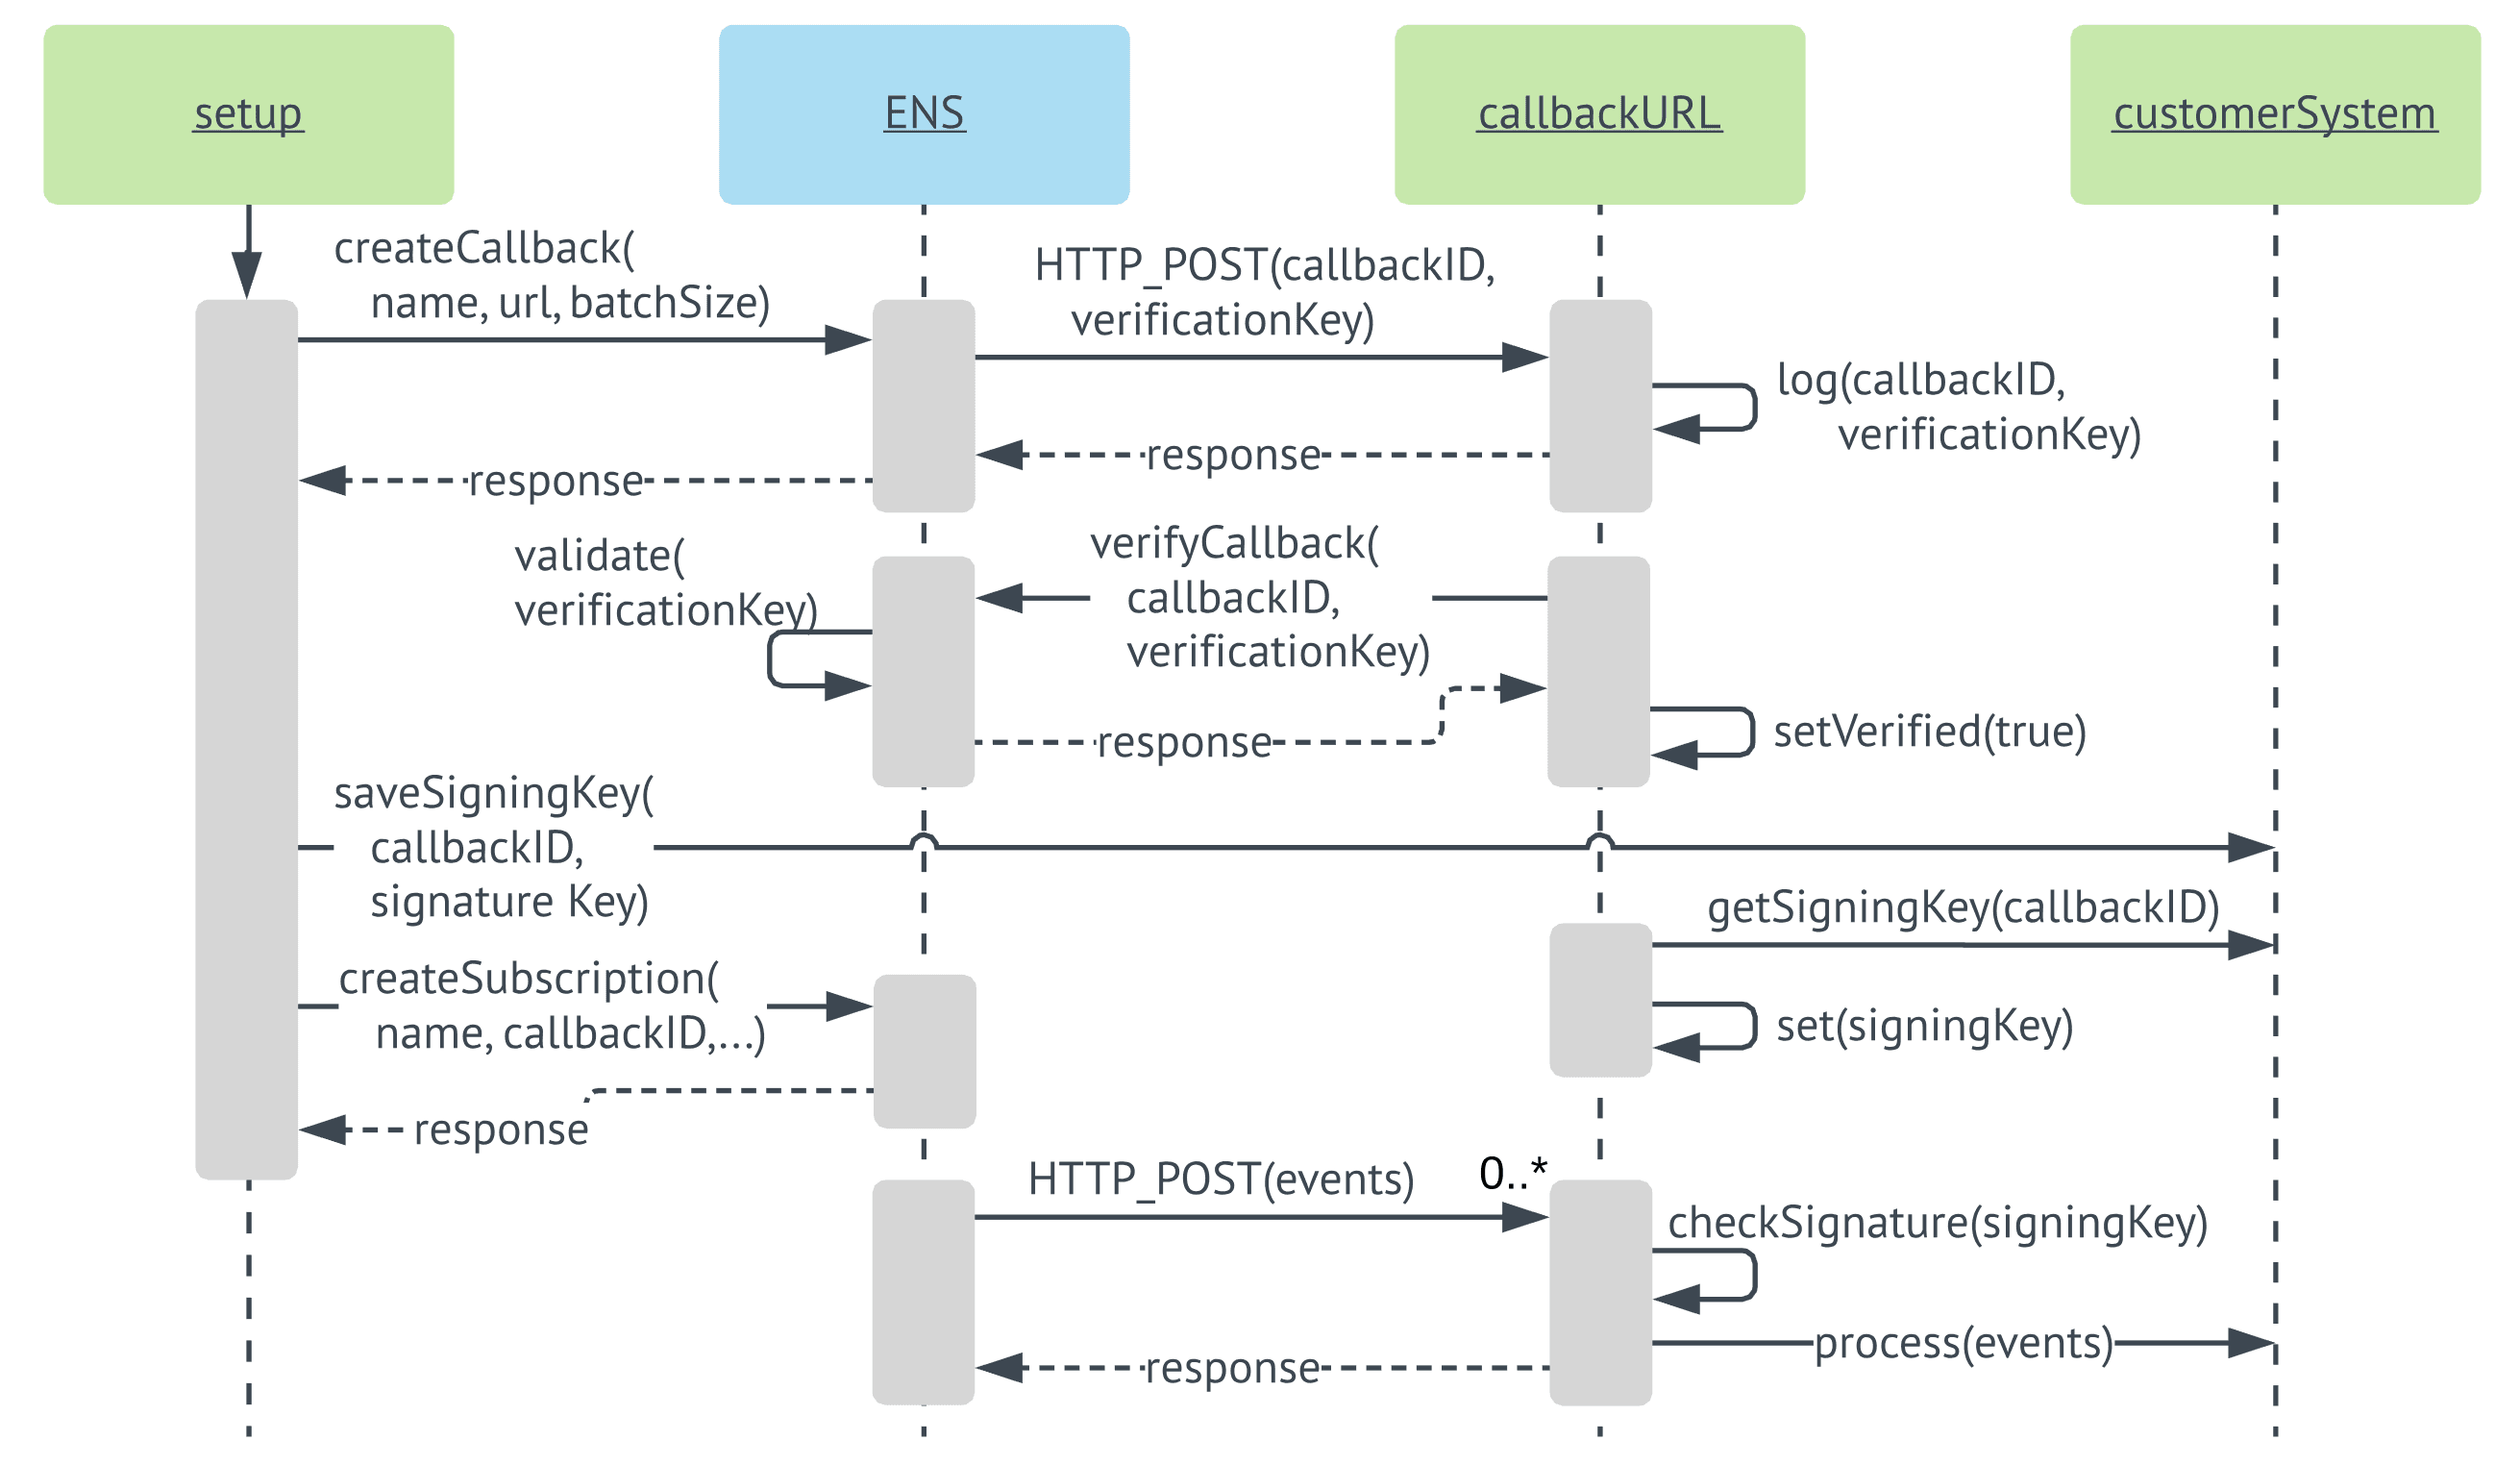 Sequence Diagram of 4 Axes: setup, ENS, callbackURL and customerSystem, Showing Events from createCallback through Response.